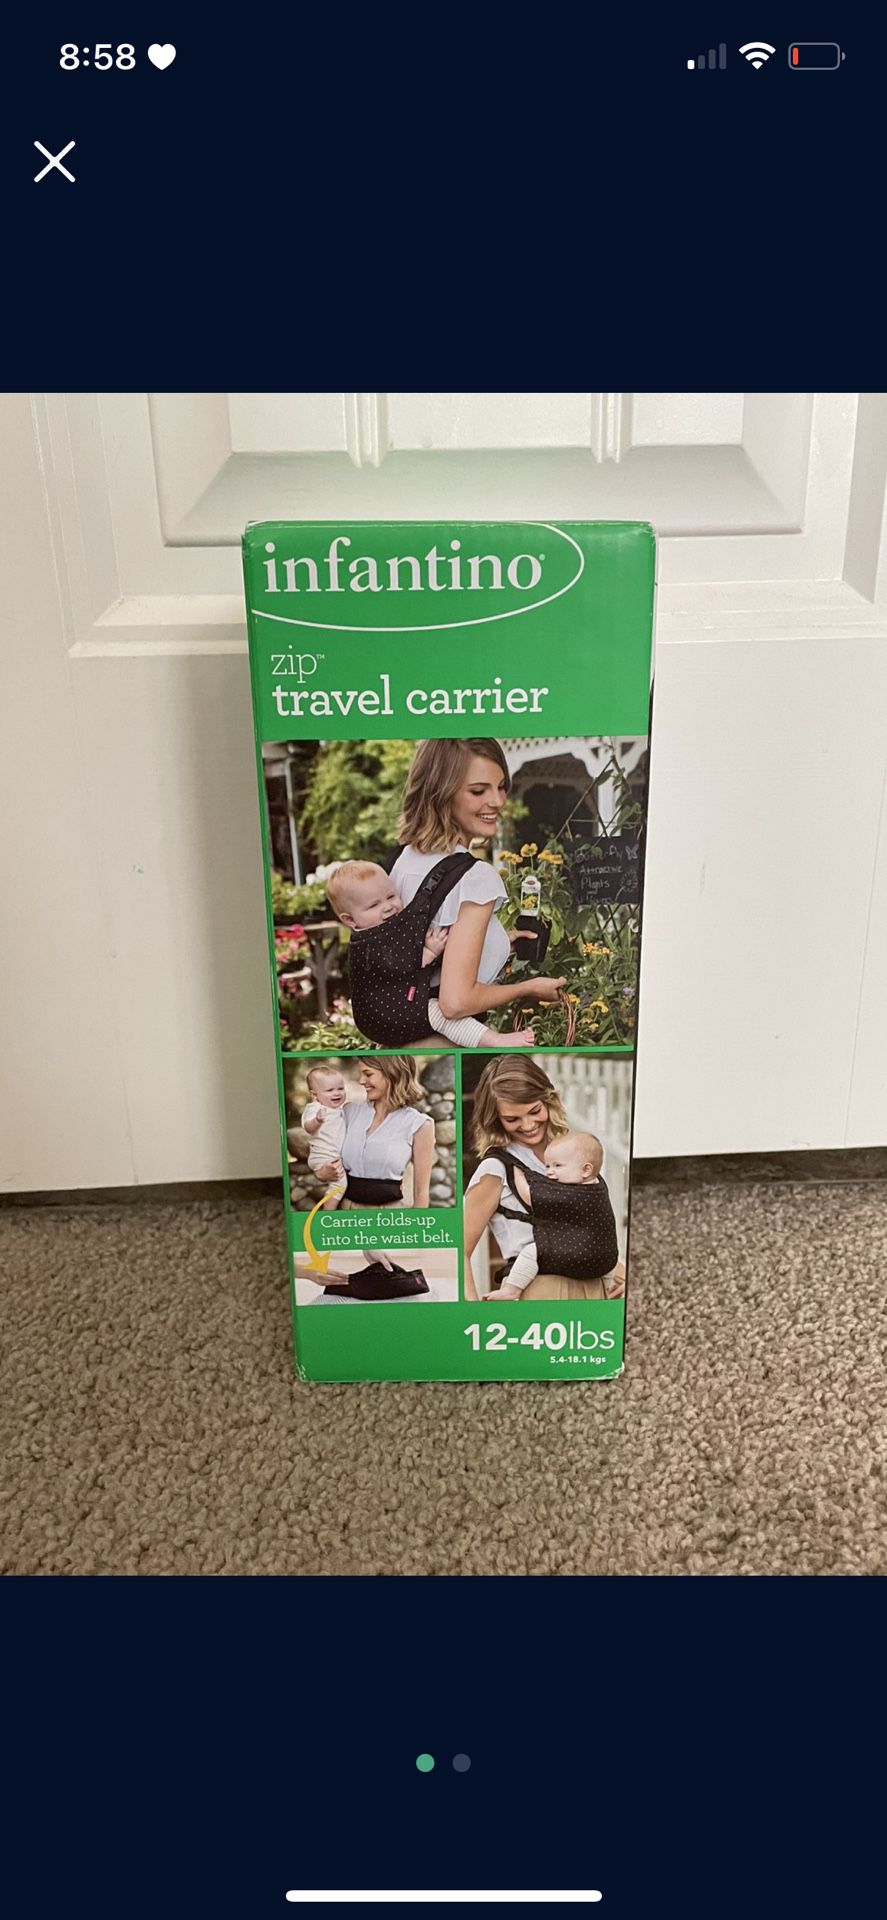 Infantino Baby Carrier New